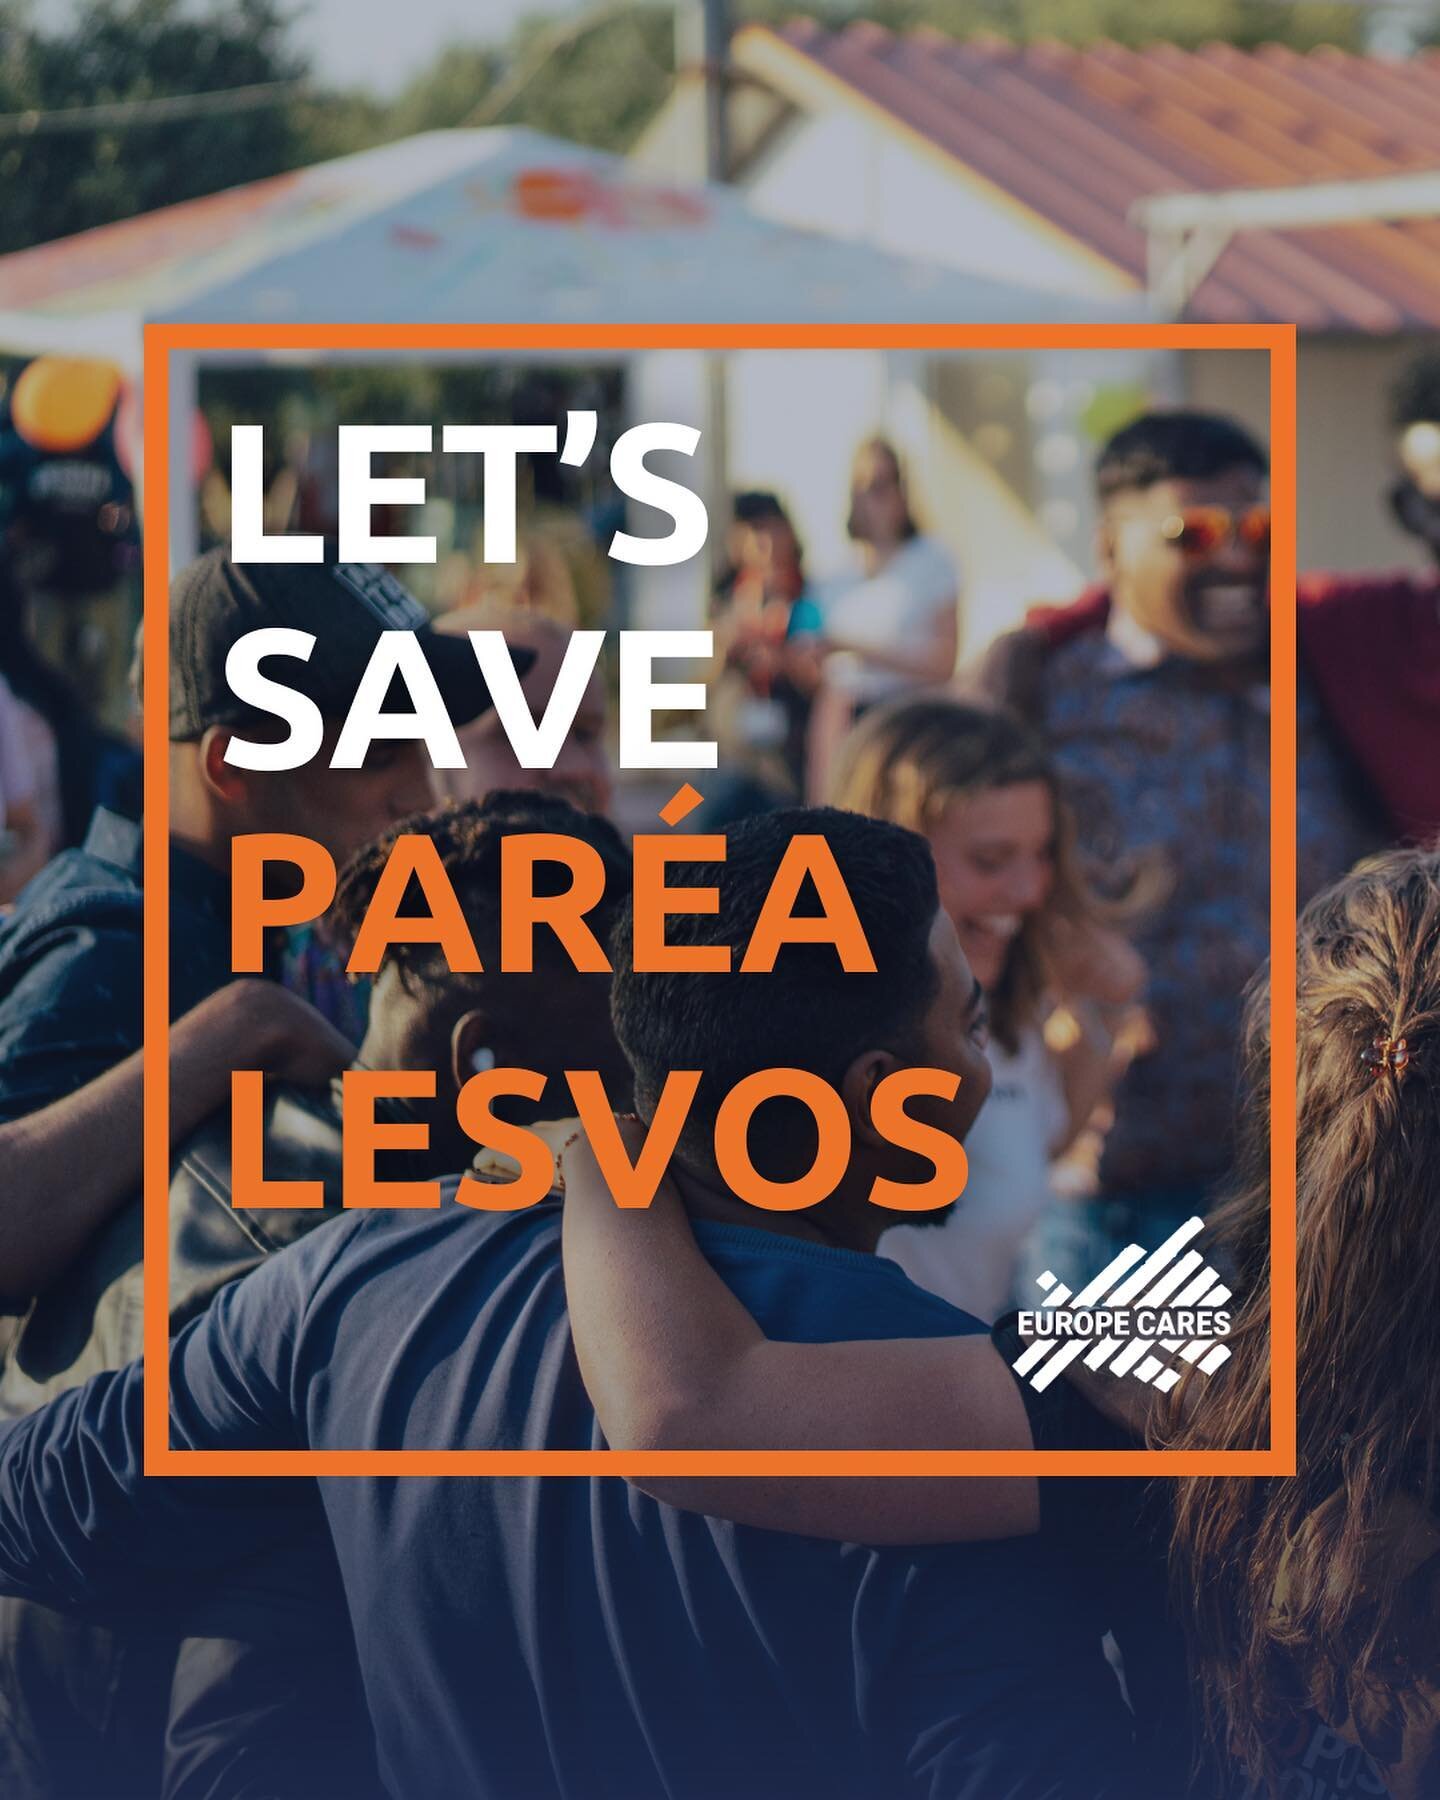 +++ We need your support to SAVE Par&eacute;a Lesvos +++

At the start of 2022 we, @europe_cares, decided to rescue the community center that we has become @parea.lesvos. We are a safe haven for community of refugees in the camp and home to 9 partner